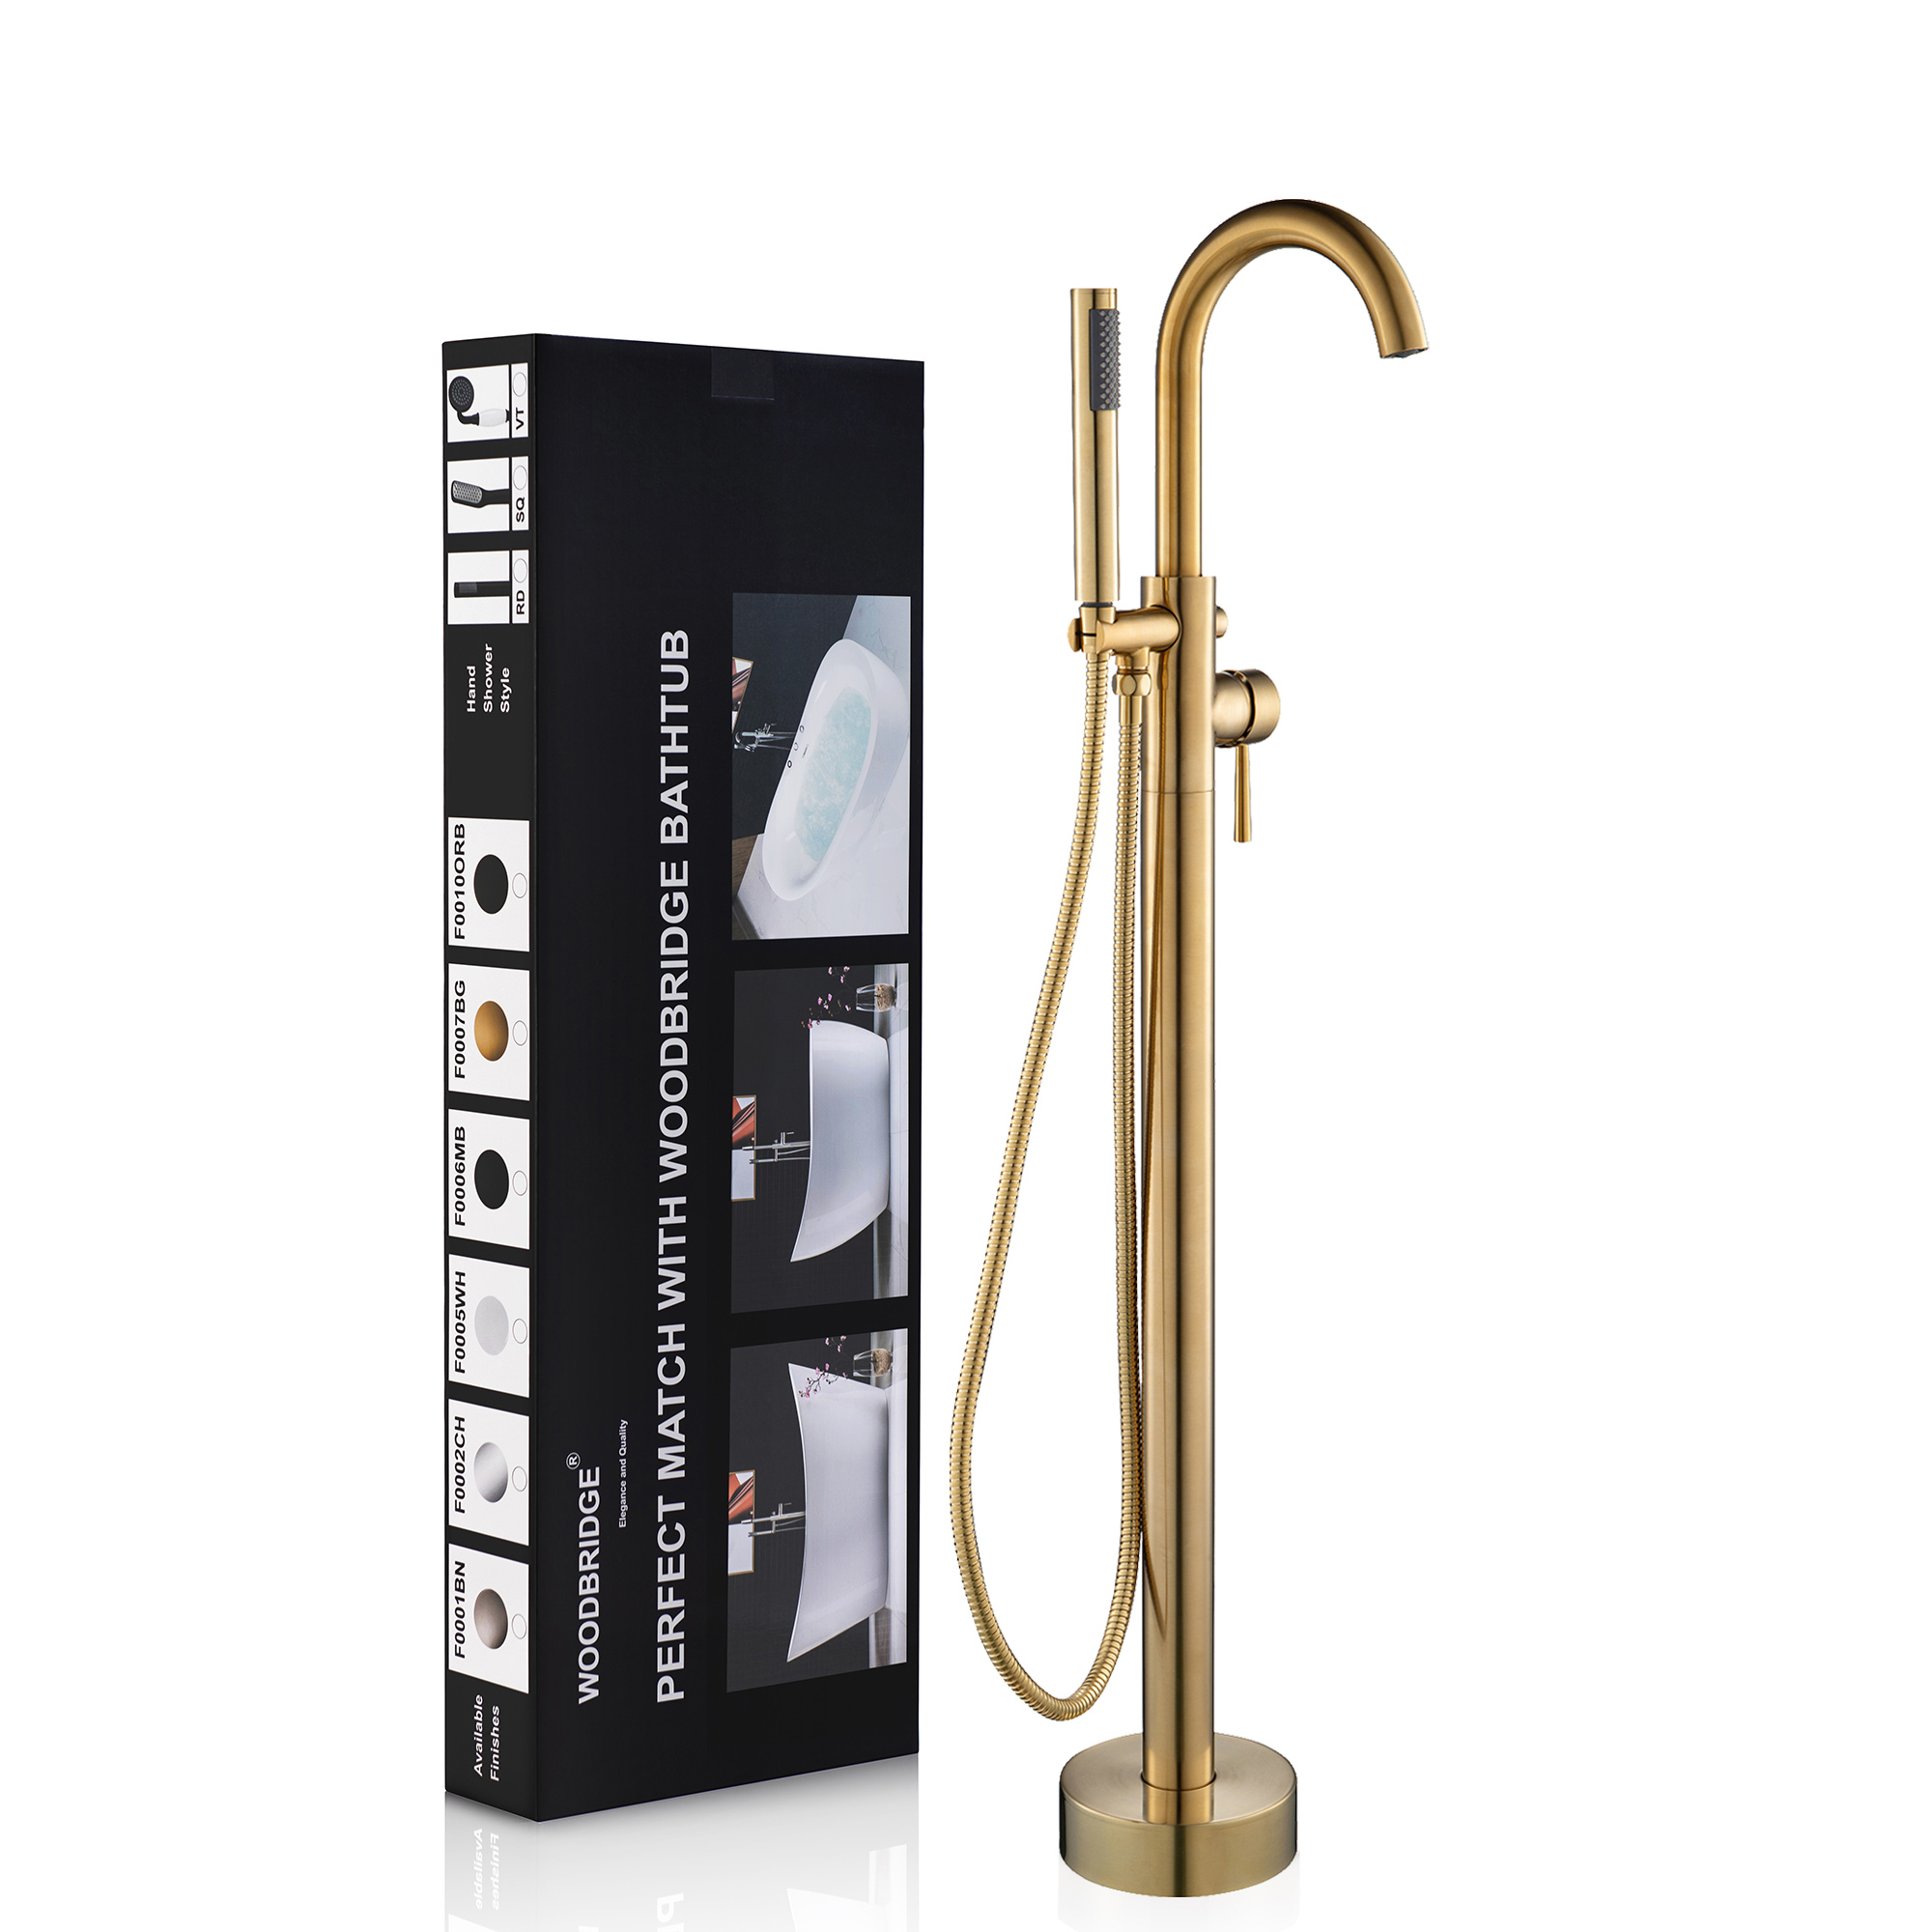  WOODBRIDGE F0007BGRD Contemporary Single Handle Floor Mount Freestanding Tub Filler Faucet with Hand shower in Brushed Gold Finish._11463